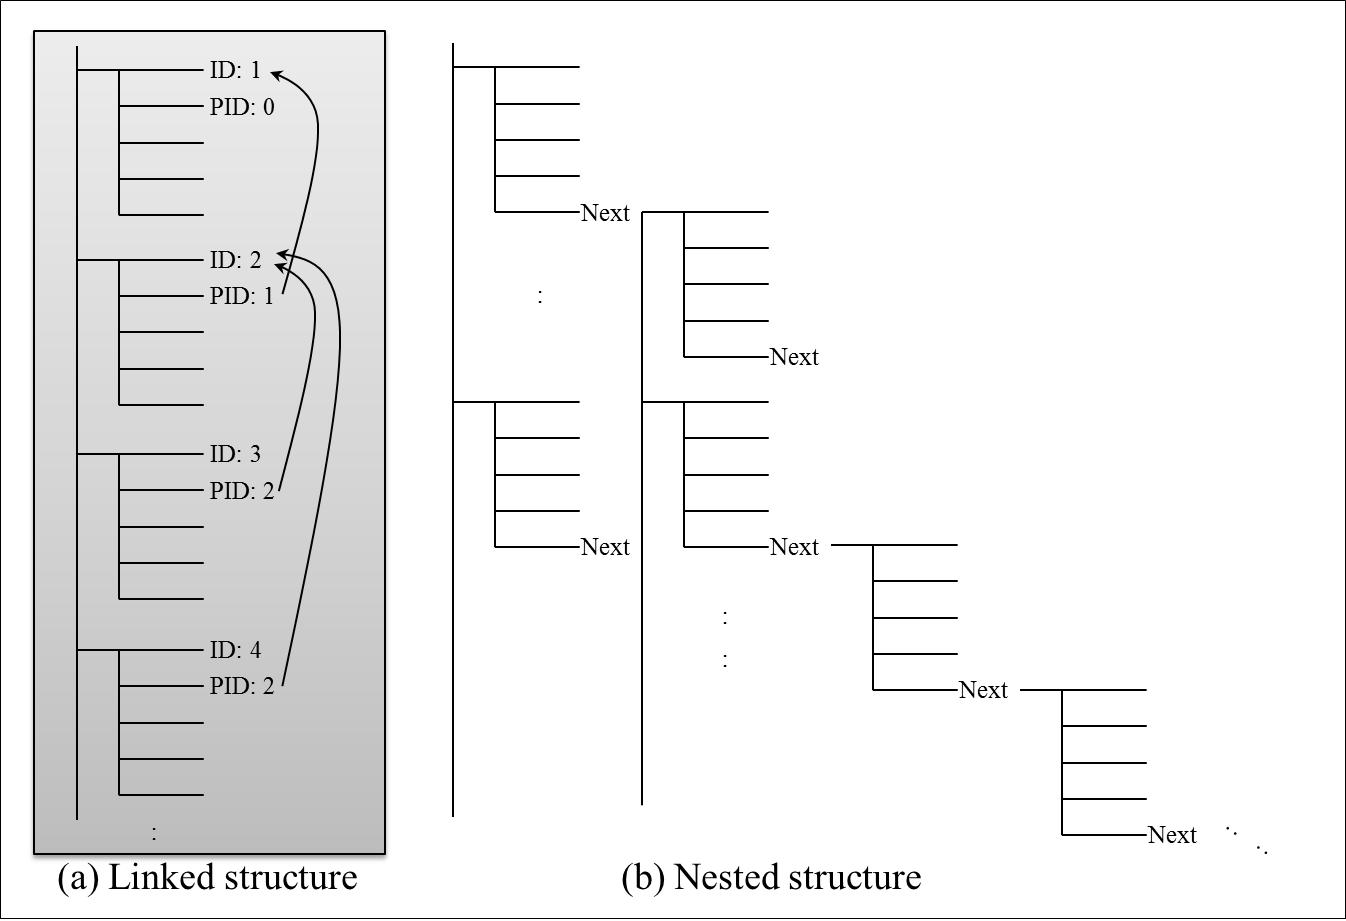 (a) Linked and (b) Nested structure of Attribute